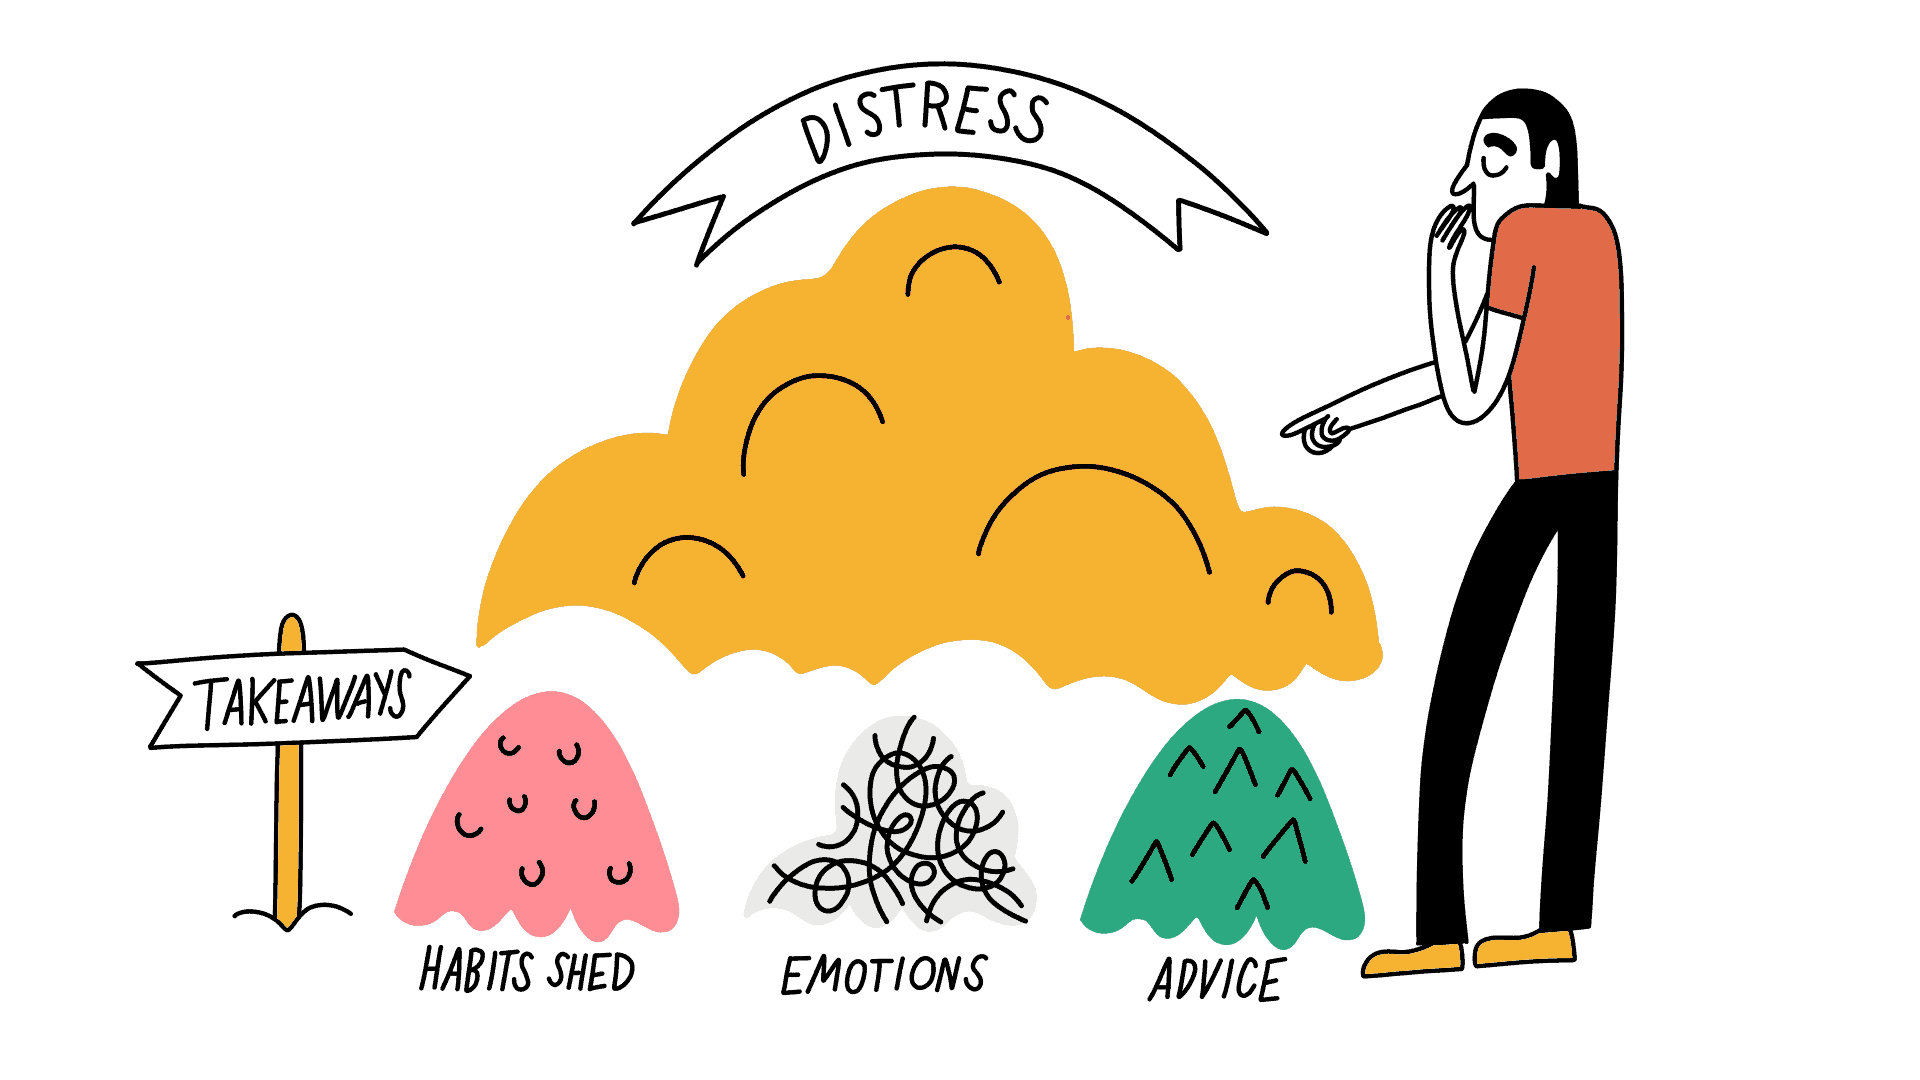 illustration of the takeaways from a life transition: habits that were shed, emotion dealt with, and advice that helped.